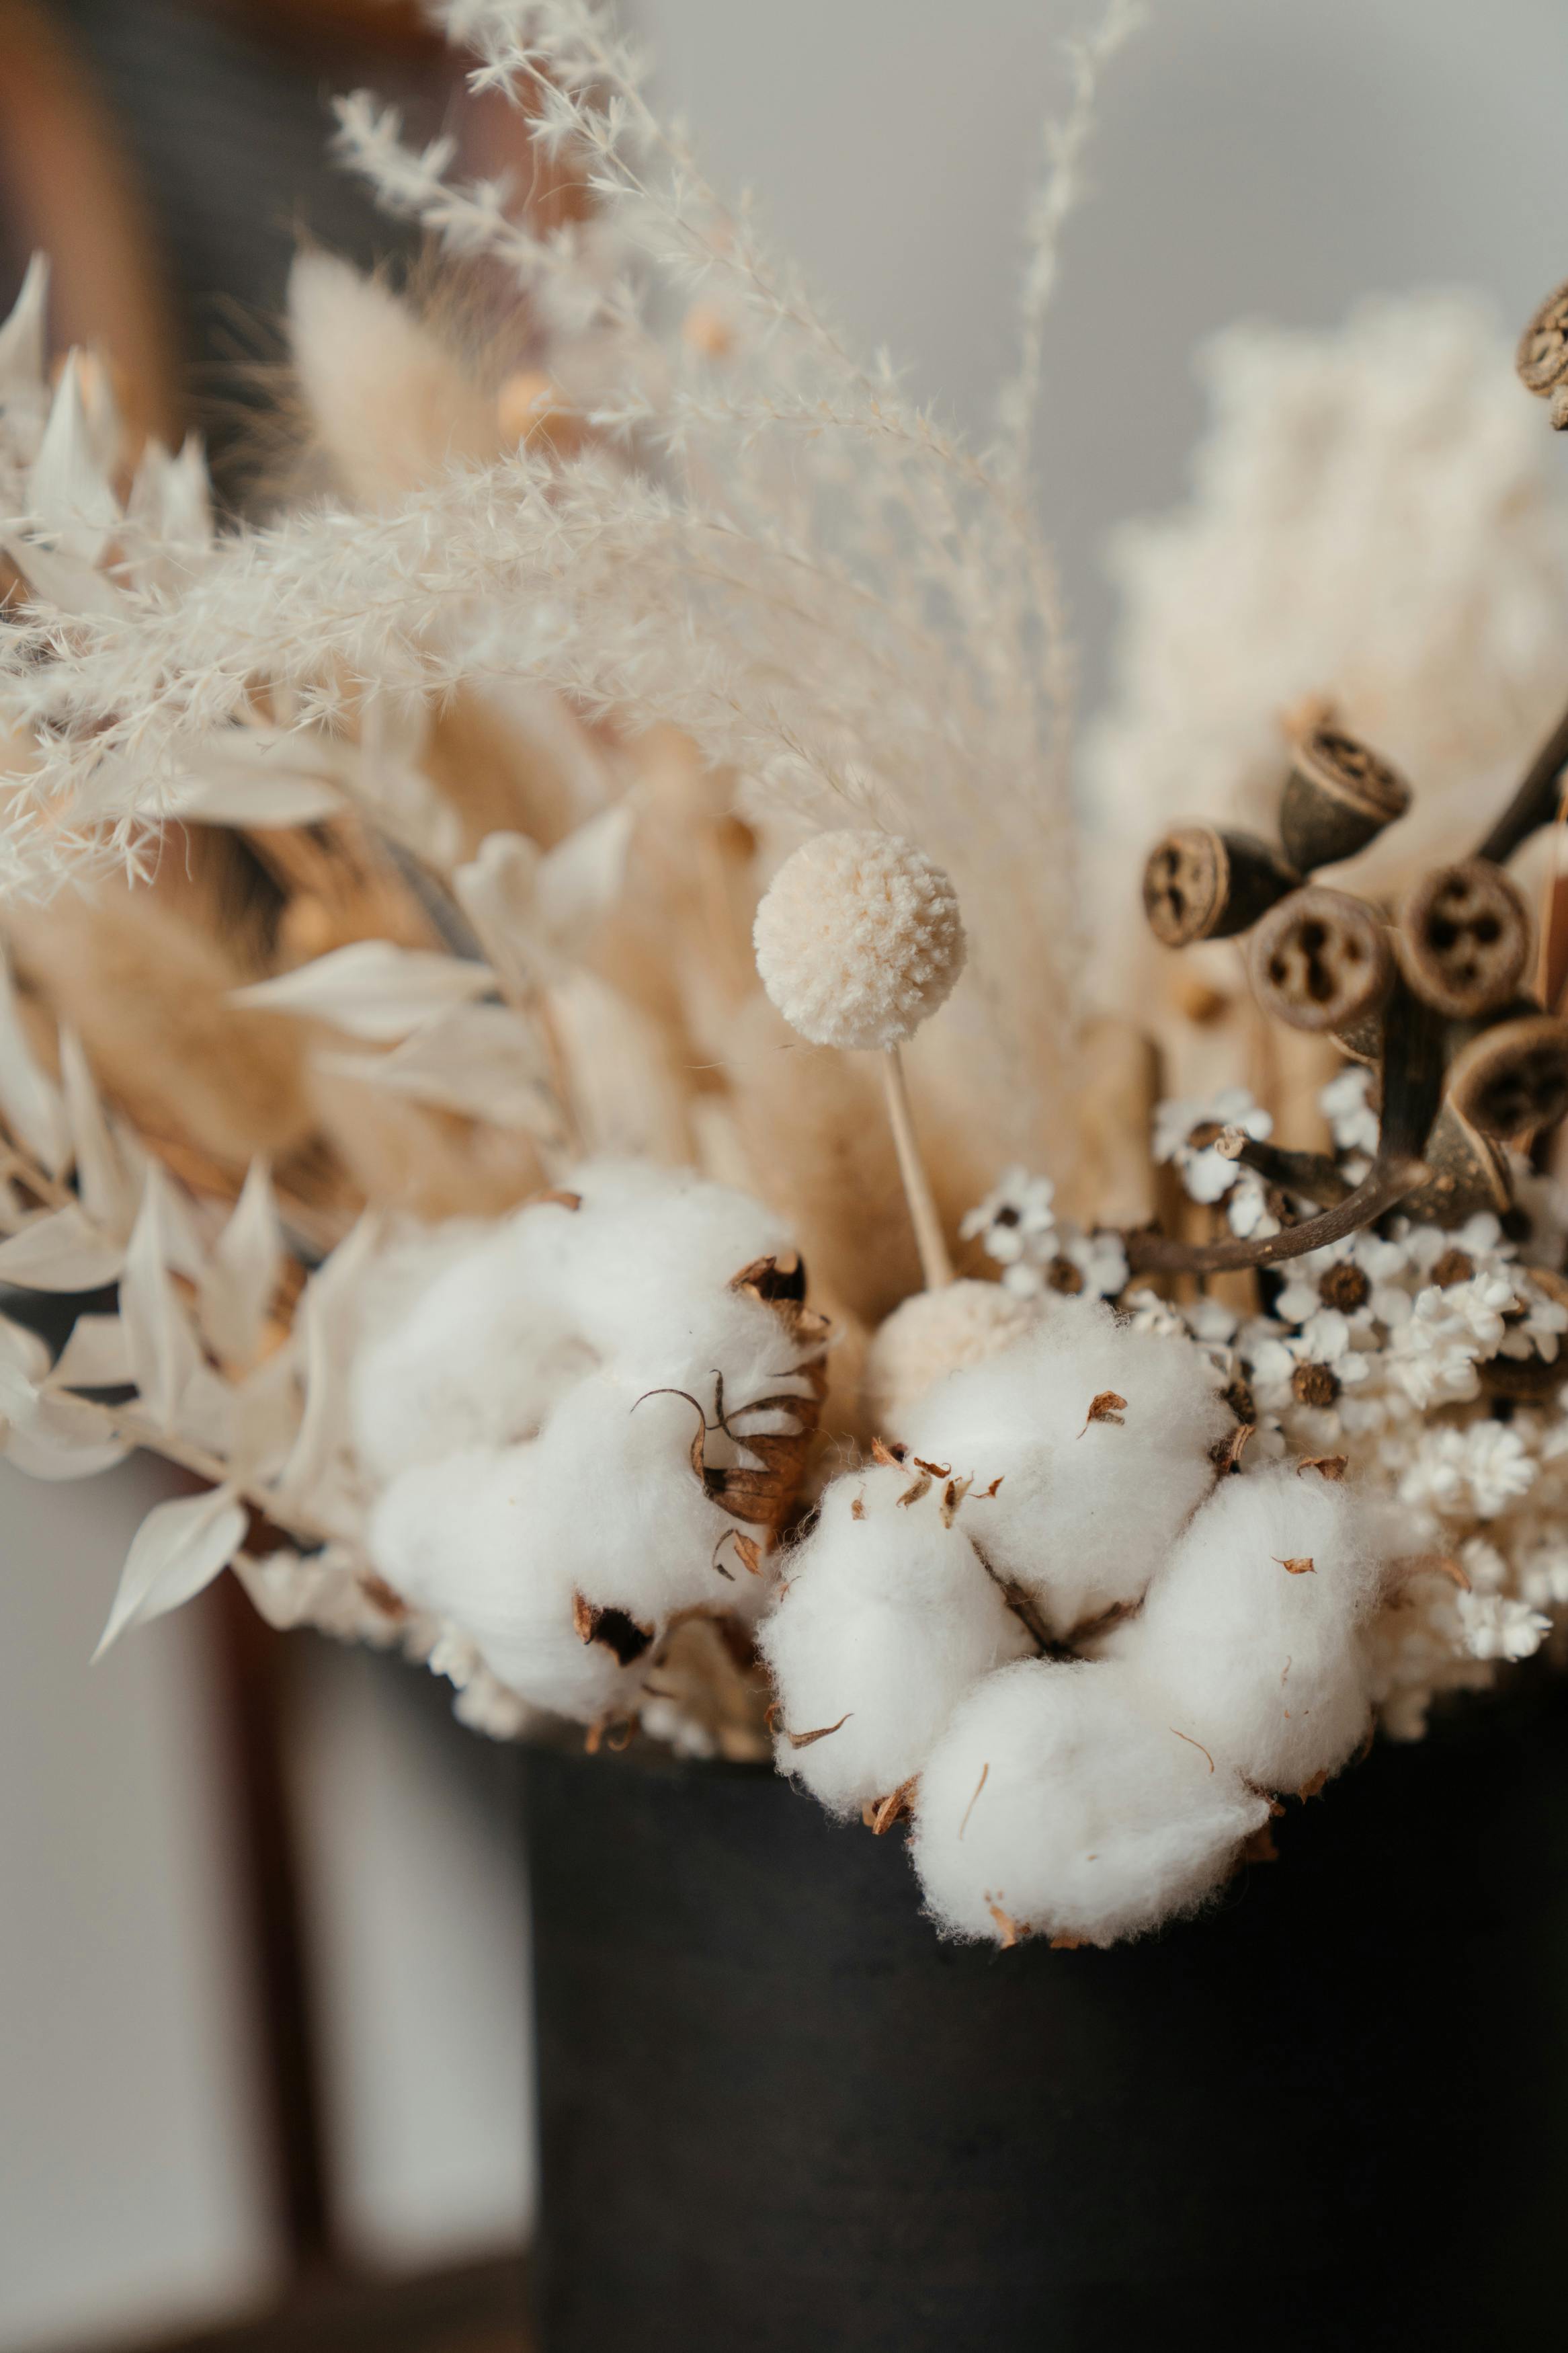 A close up of some dried plants with some white flowers · Free Stock Photo